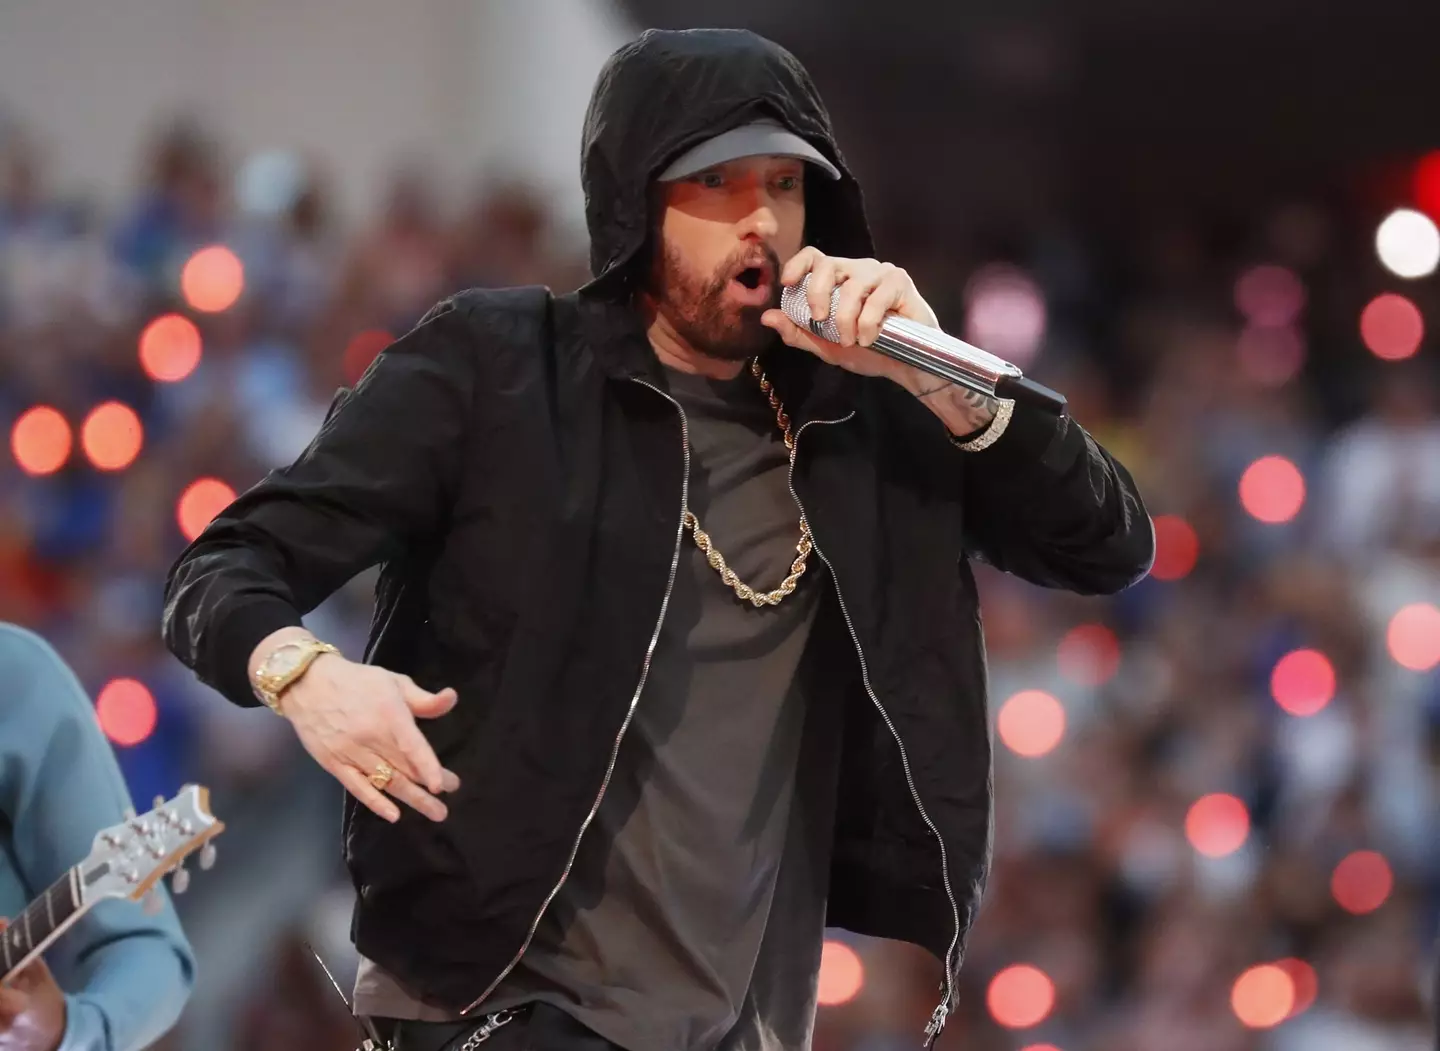 Eminem has taken aim at many celebrities over his time.